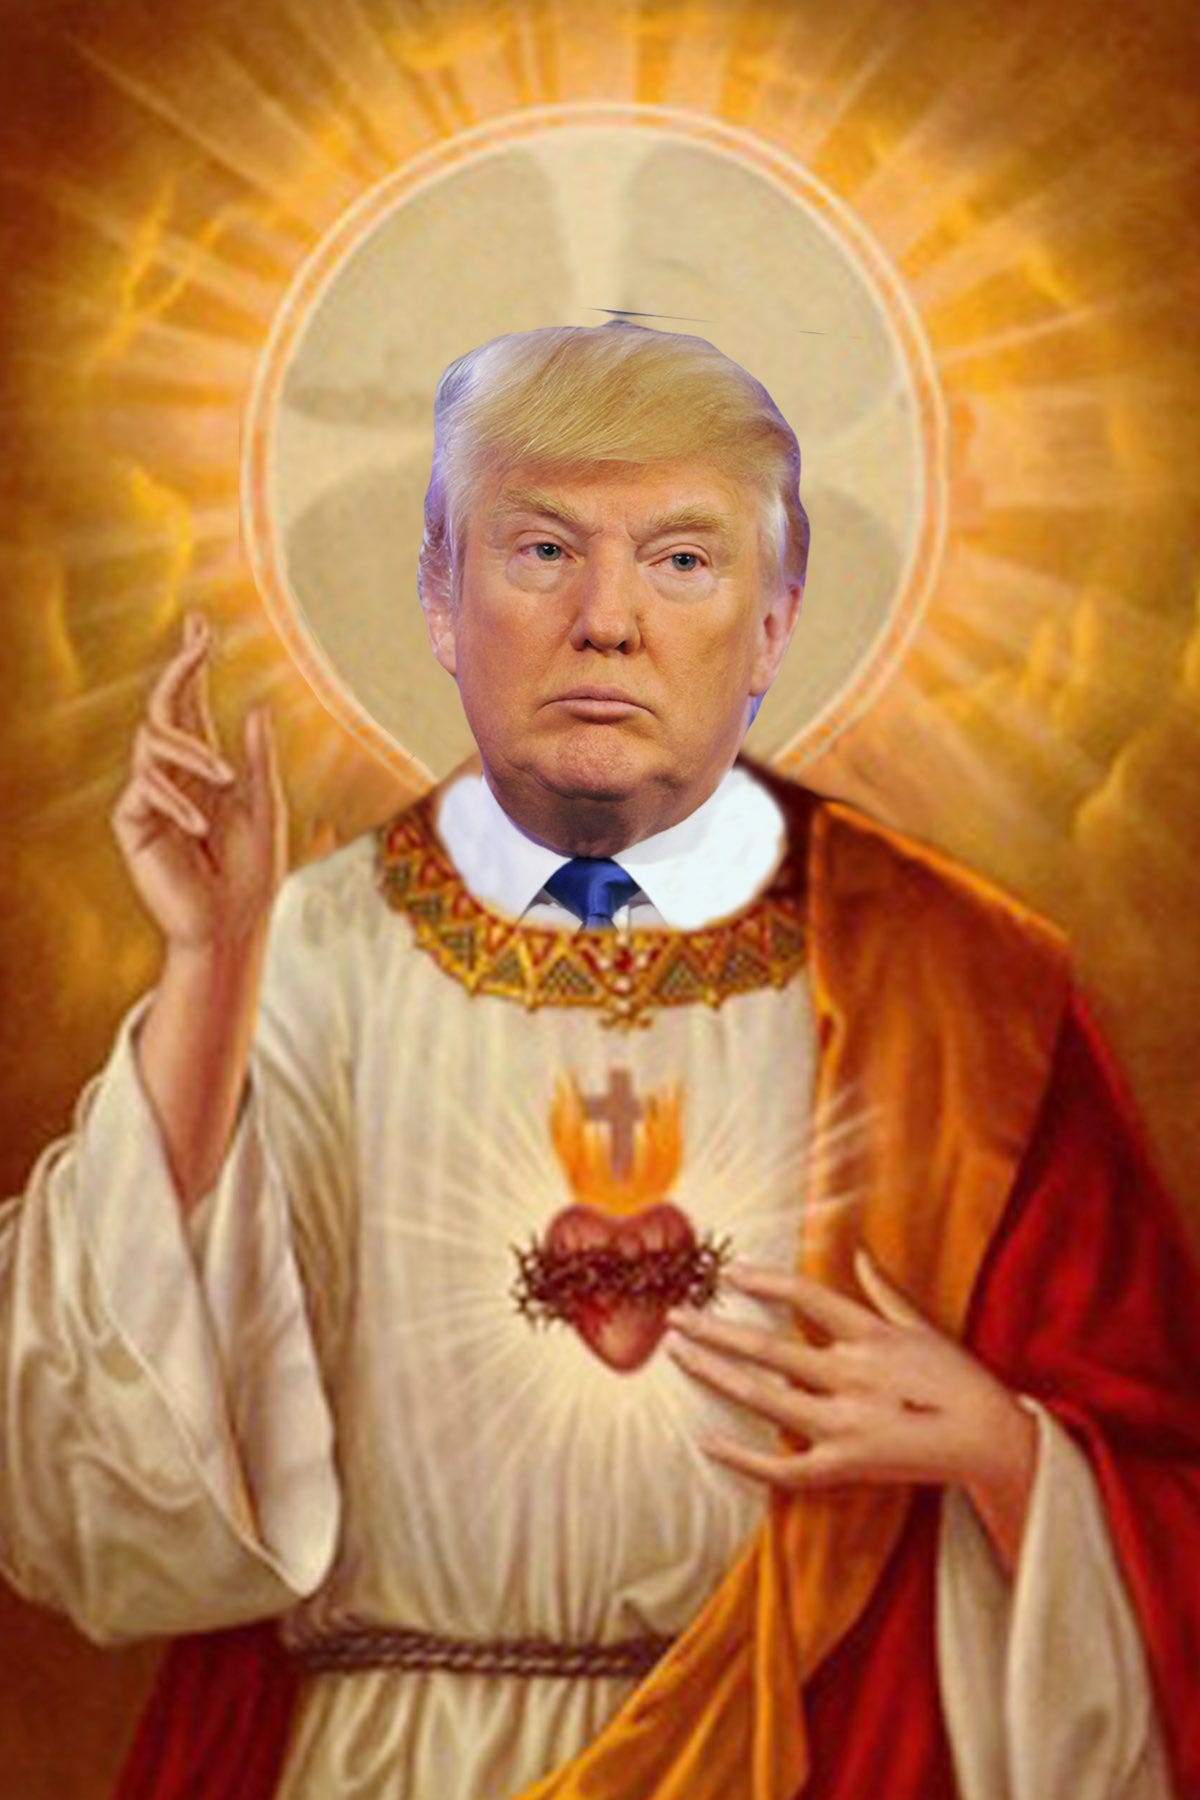 Does anyone truly believe "God" wrapped his "protective arms" around Donald Trump?